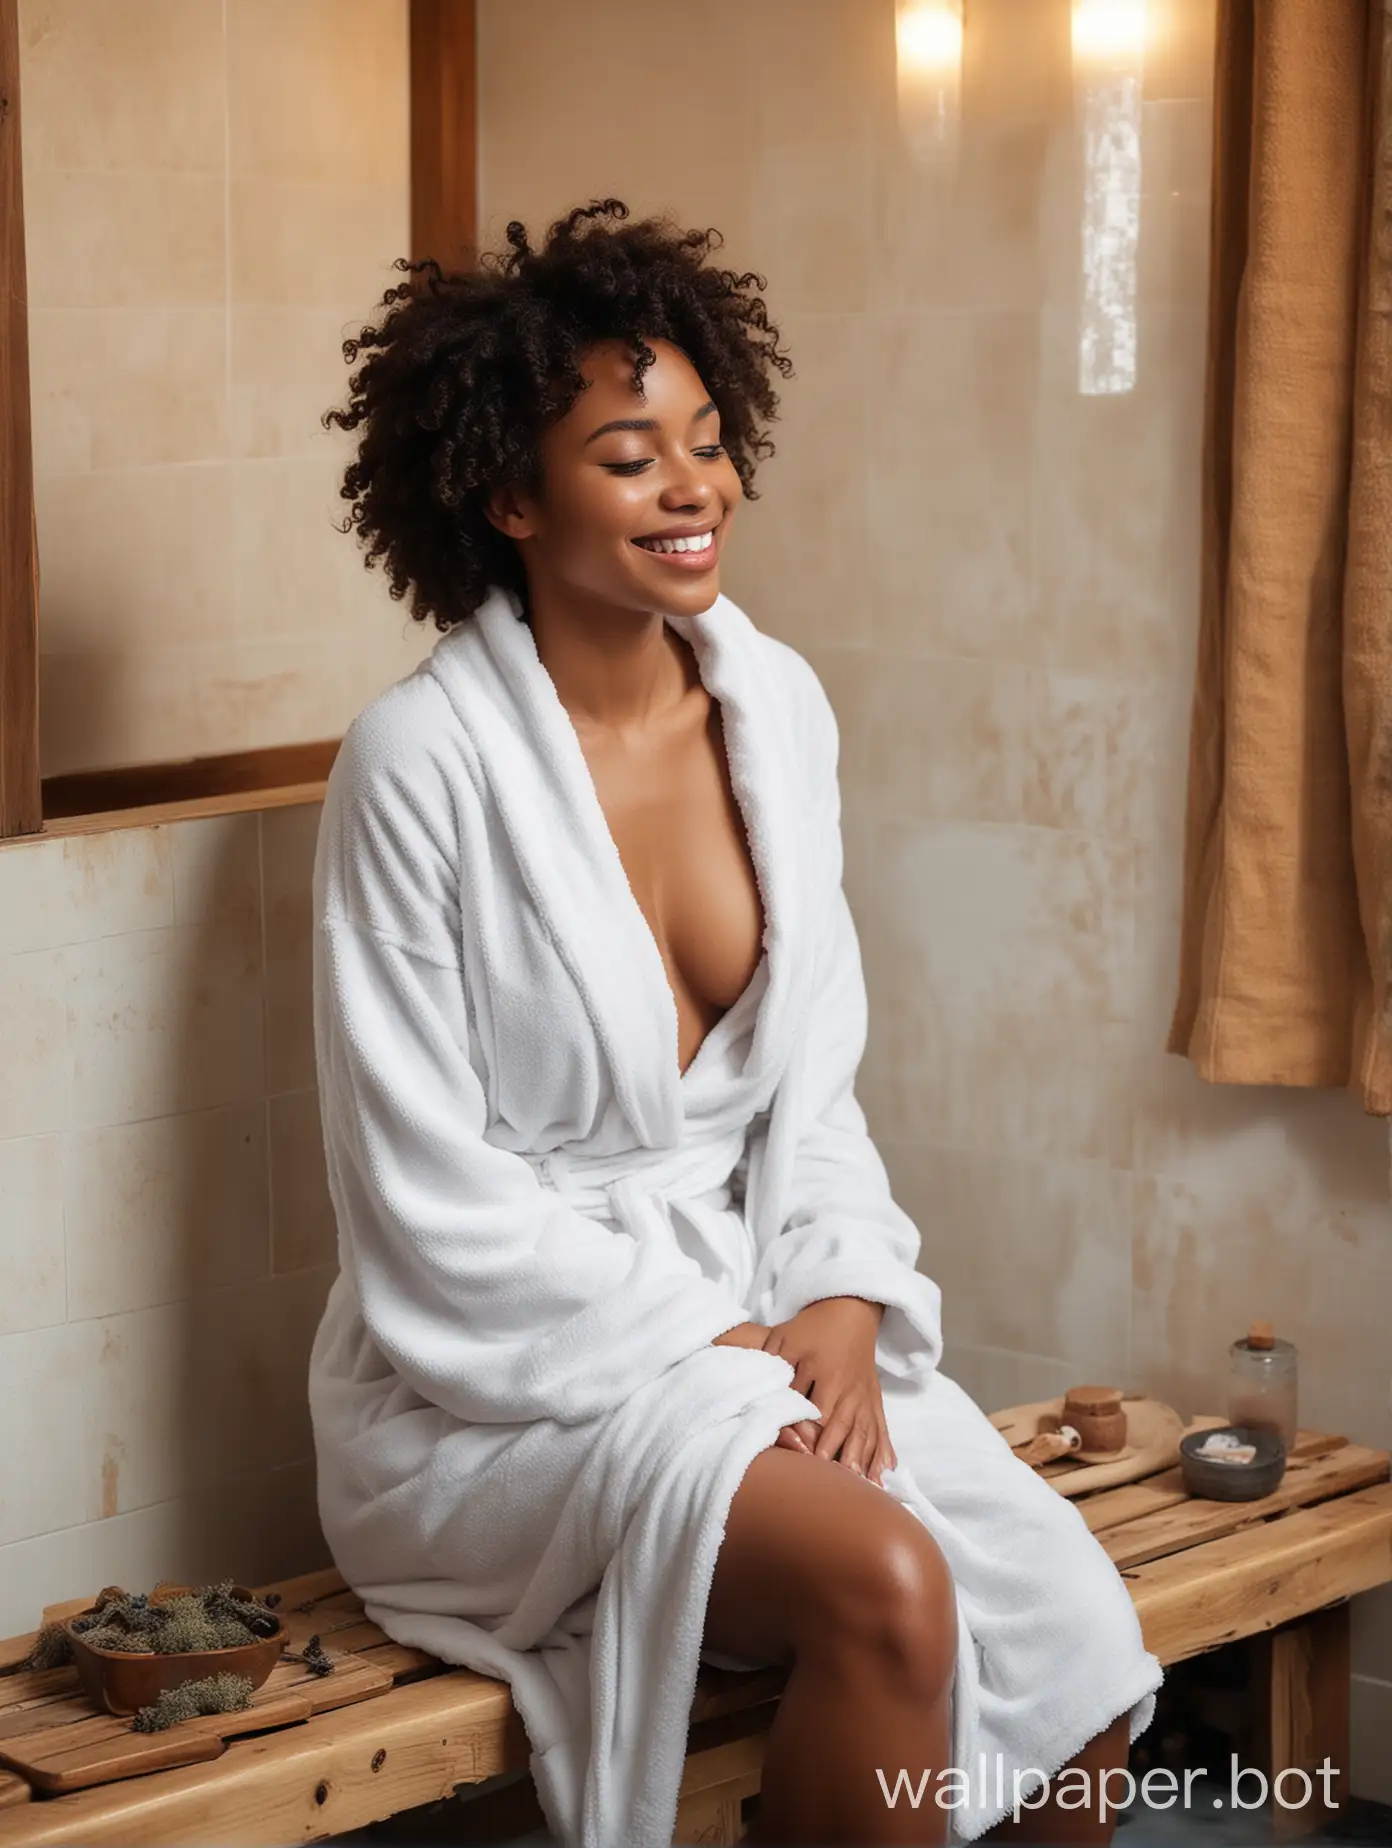 generate photo A sexy African American woman sitting on a bench in a white robe in the bathhouse, smiling relaxed. Her skin glistens from the steam, curly and wet hair. Next to her on the bench is a magazine with a poster of Sunny Spas. Around her you can hear the pleasant sound of steam and the smell of herbs, creating an atmosphere of coziness and tranquility. The woman enjoys the moment of rest and care for her body in this cozy corner of the bathhouse.